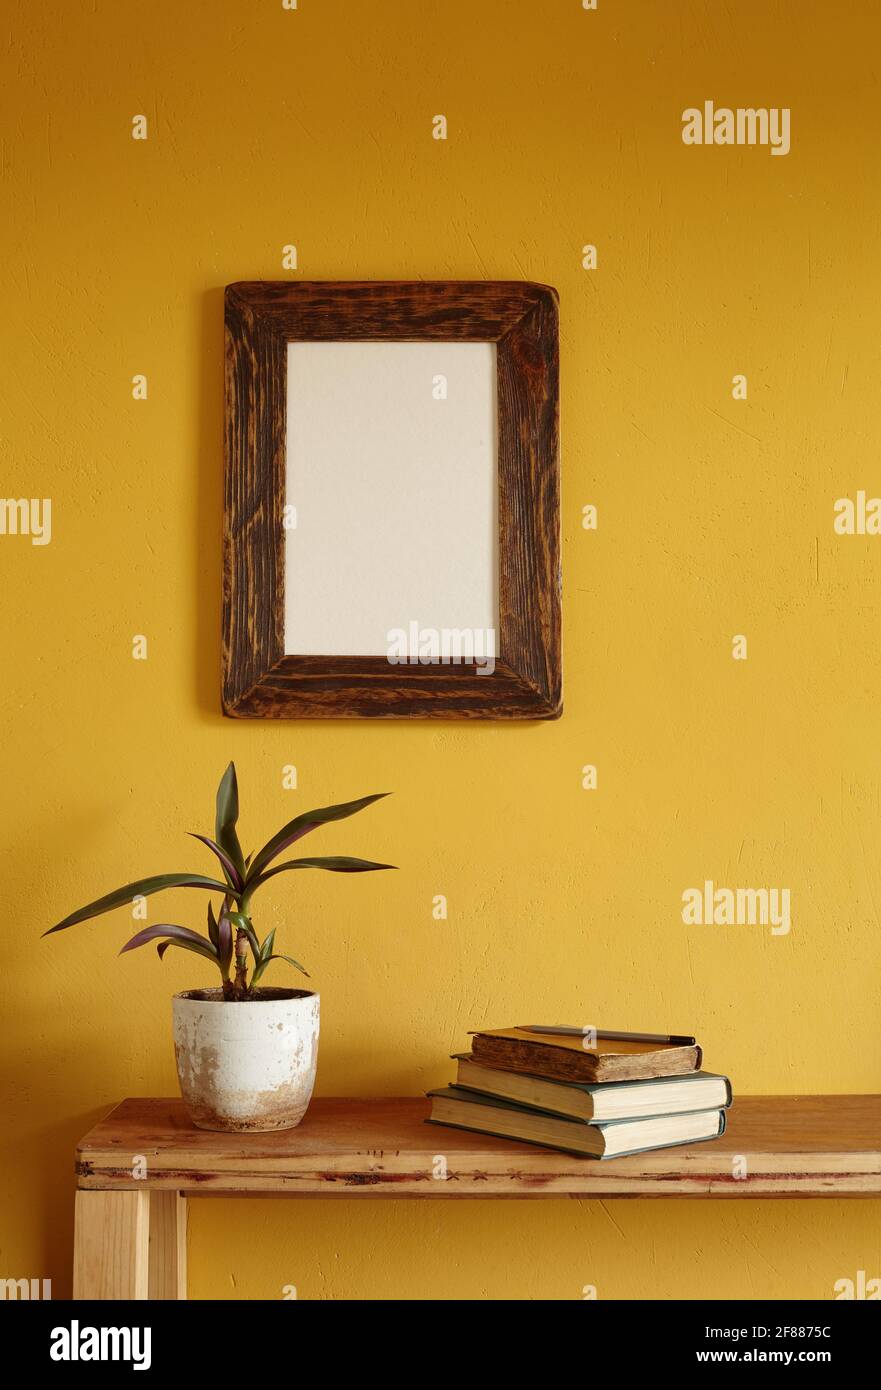 Wooden picture frame mockup. Flowerpot on a pile of books on an old wooden shelf. Composition on a yellow wall background Stock Photo